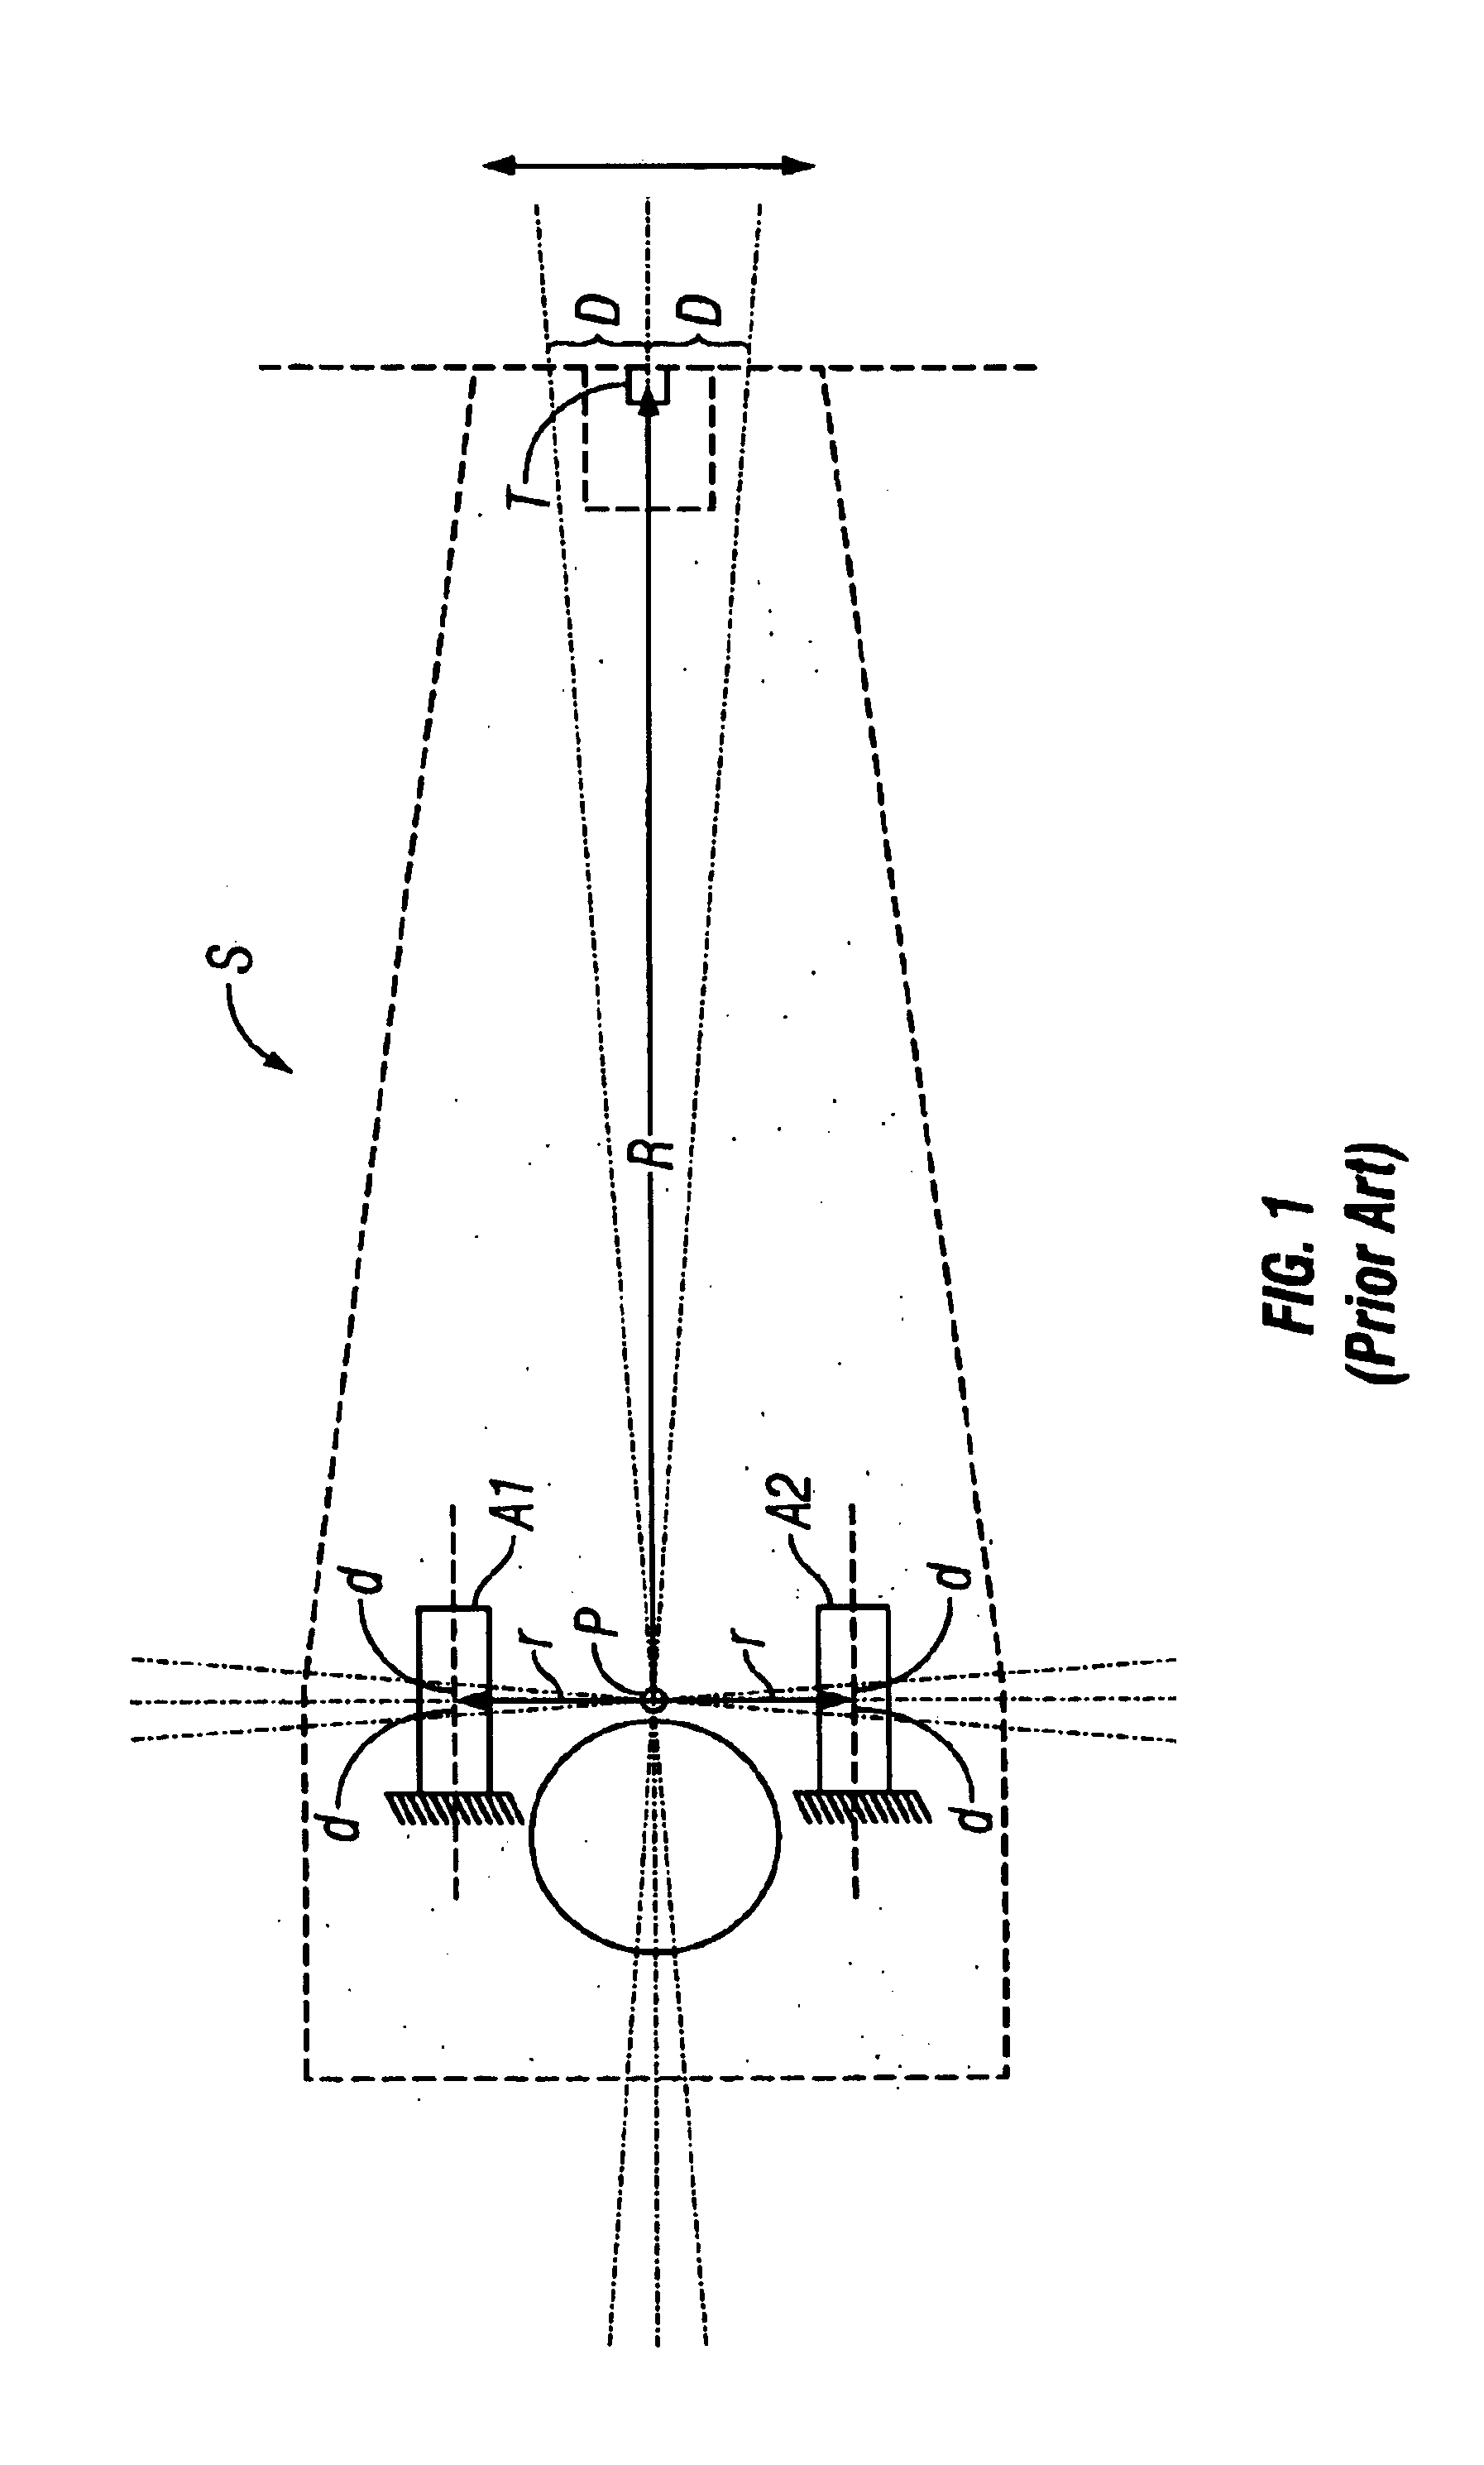 Dual stage suspension with PZT actuators arranged to improve actuation in suspensions of short length